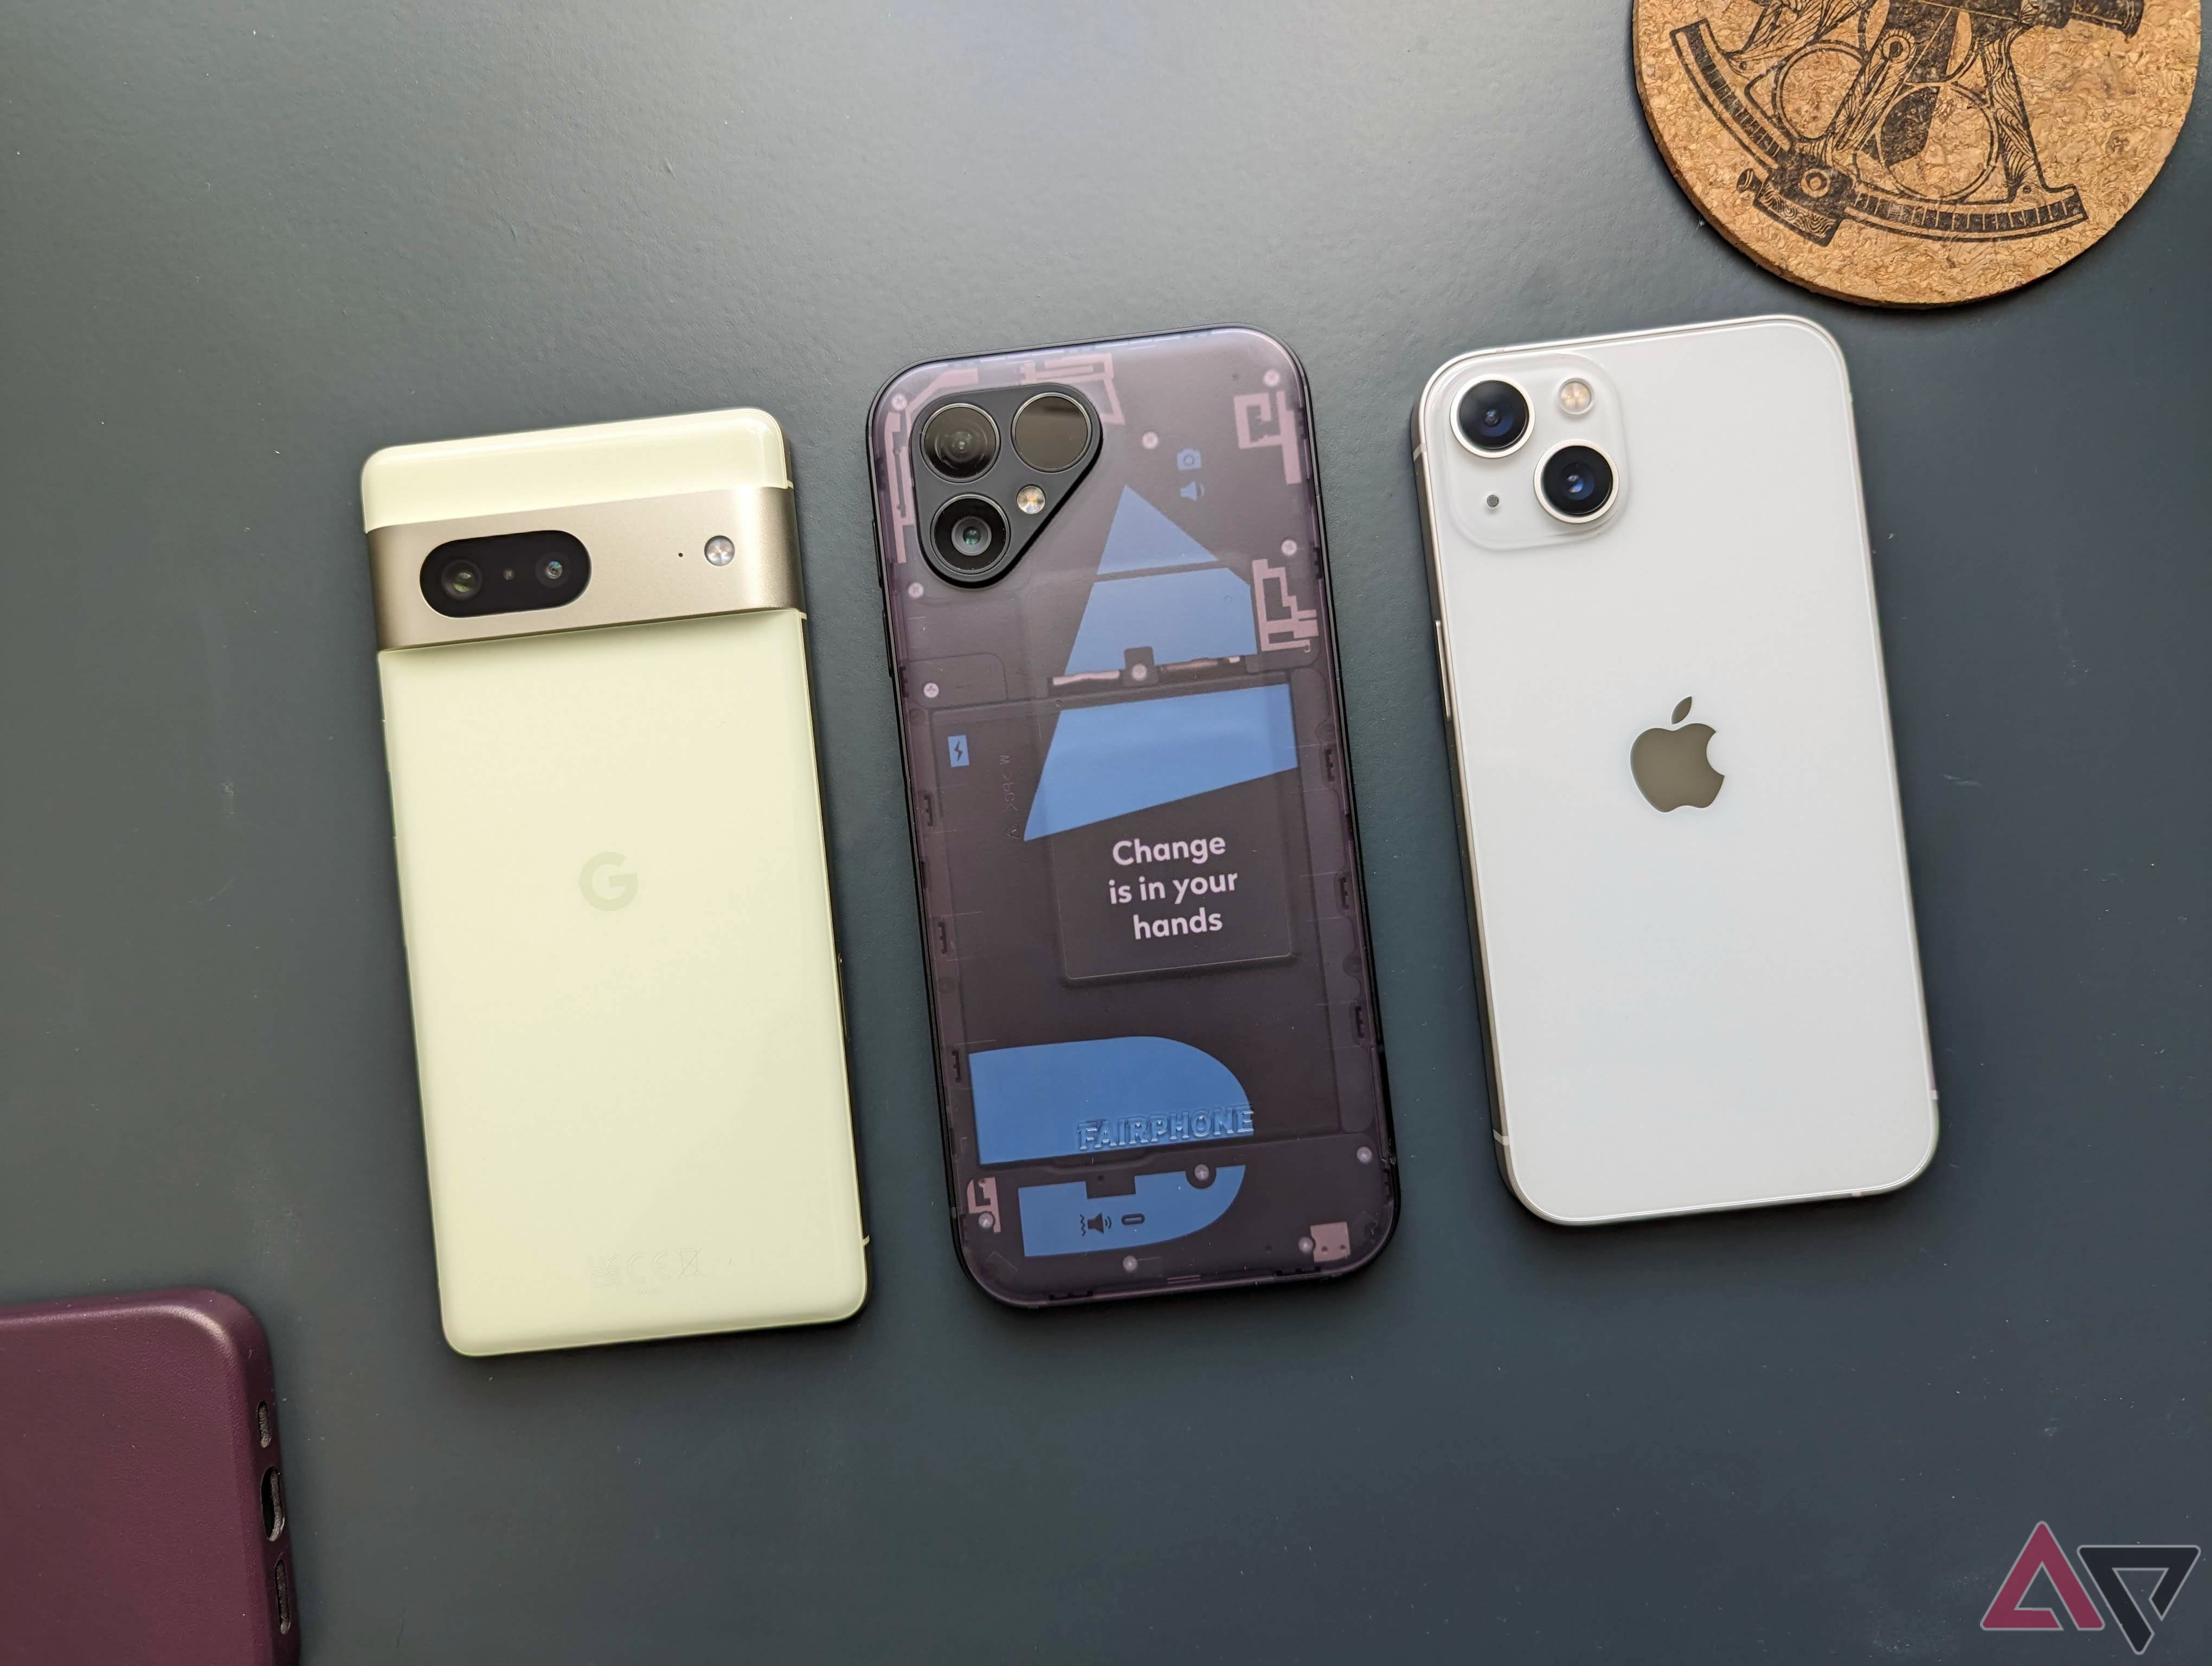 The Google Pixel 7, the Fairphone 5, and the Apple iPhone 13 next to each other on a green background with random items sprinkled around them